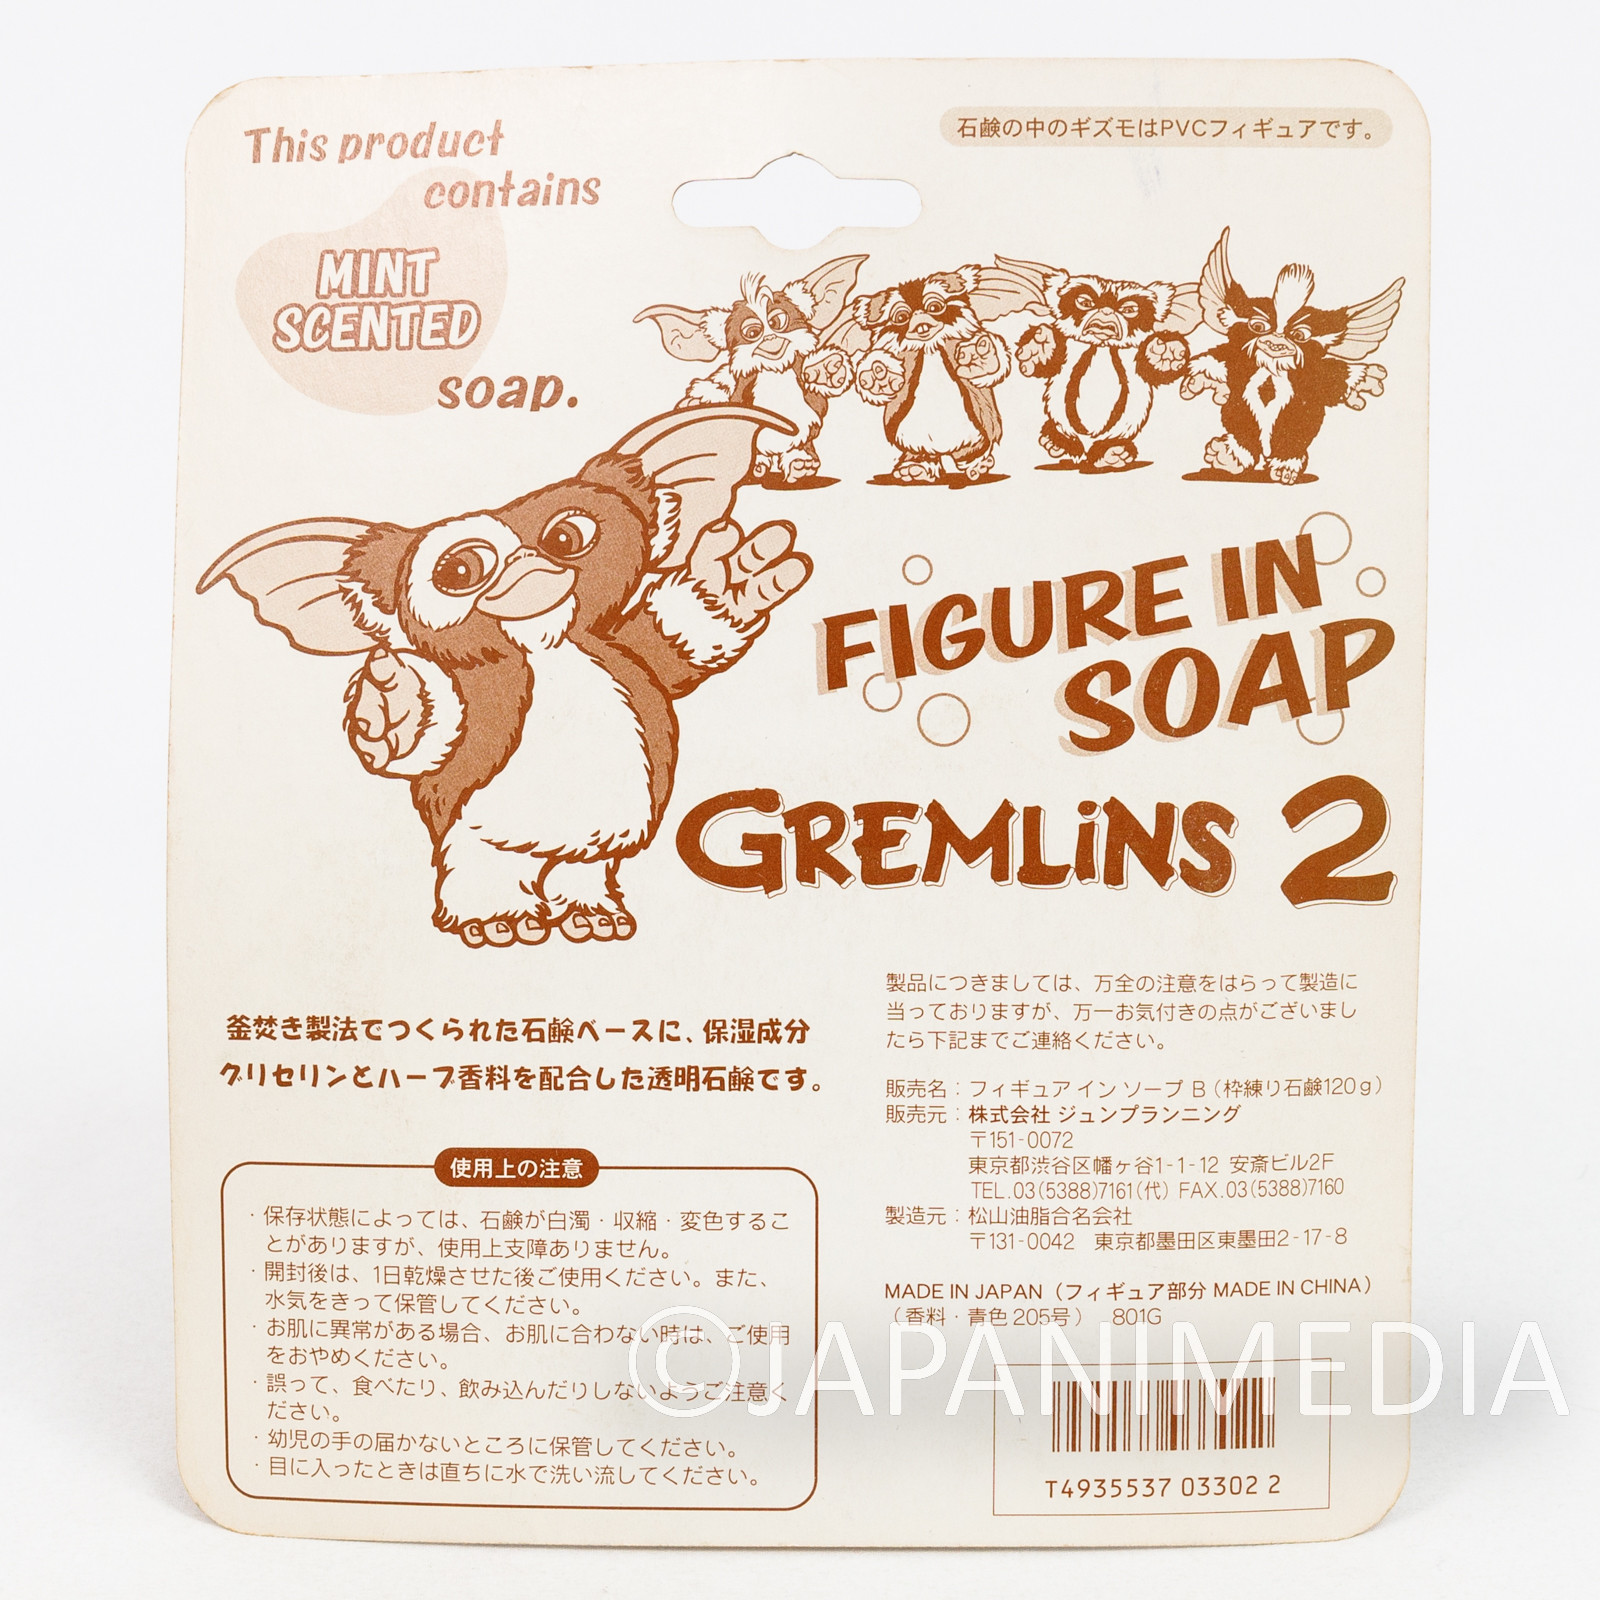 Gremlins 2 The New Batch Gizmo Figure in Soap Jun Planning #2